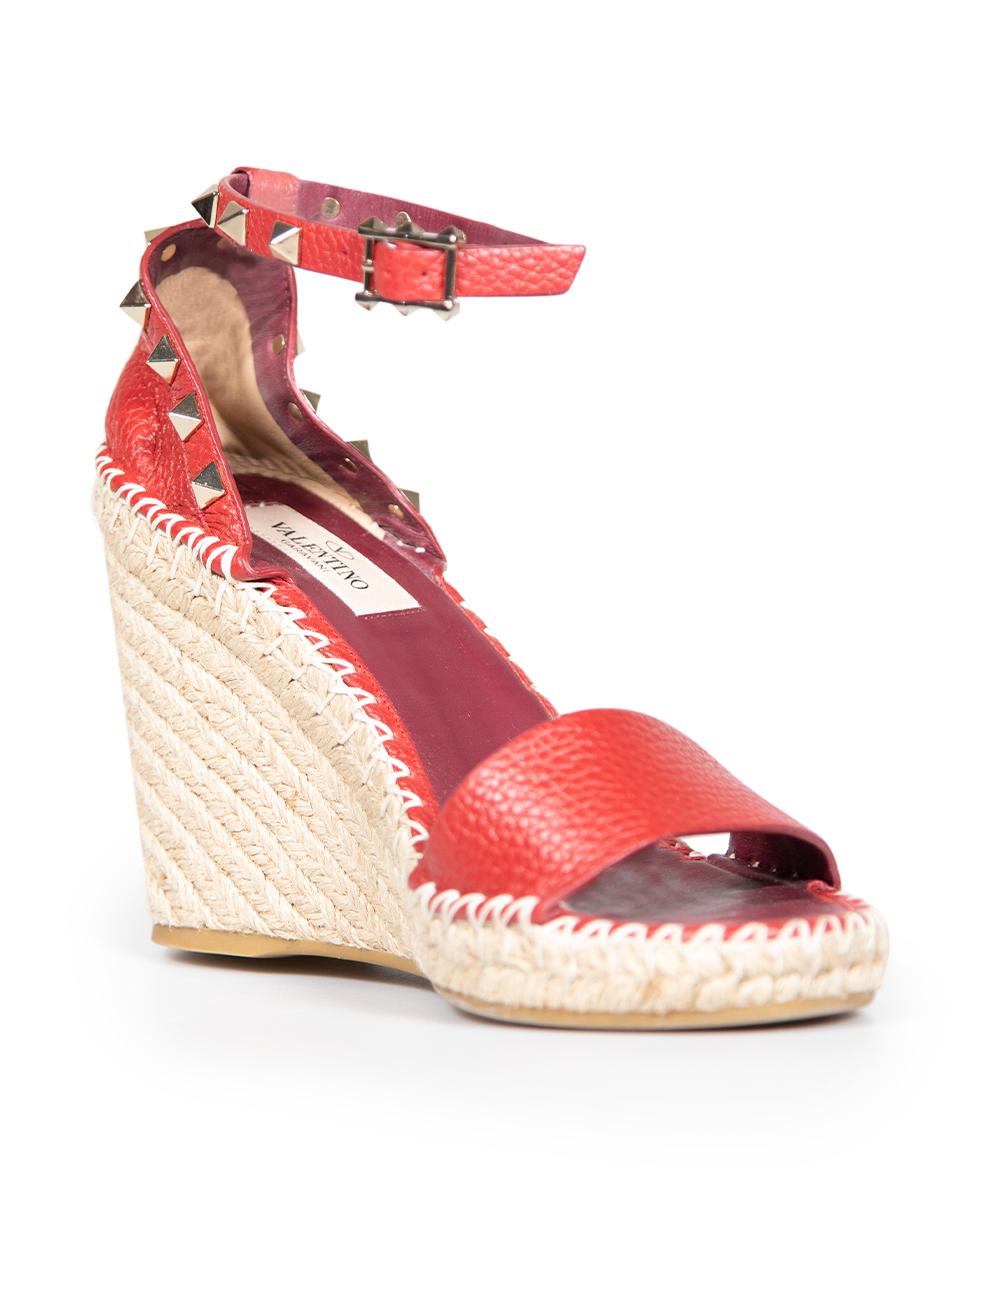 CONDITION is Very good. Hardly any visible wear to shoes is evident on this used Valentino designer resale item. These shoes come with original dust bags.
 
 Details
 Red
 Leather
 Espadrille wedges
 High heeled
 Rockstud detail
 Open toe
